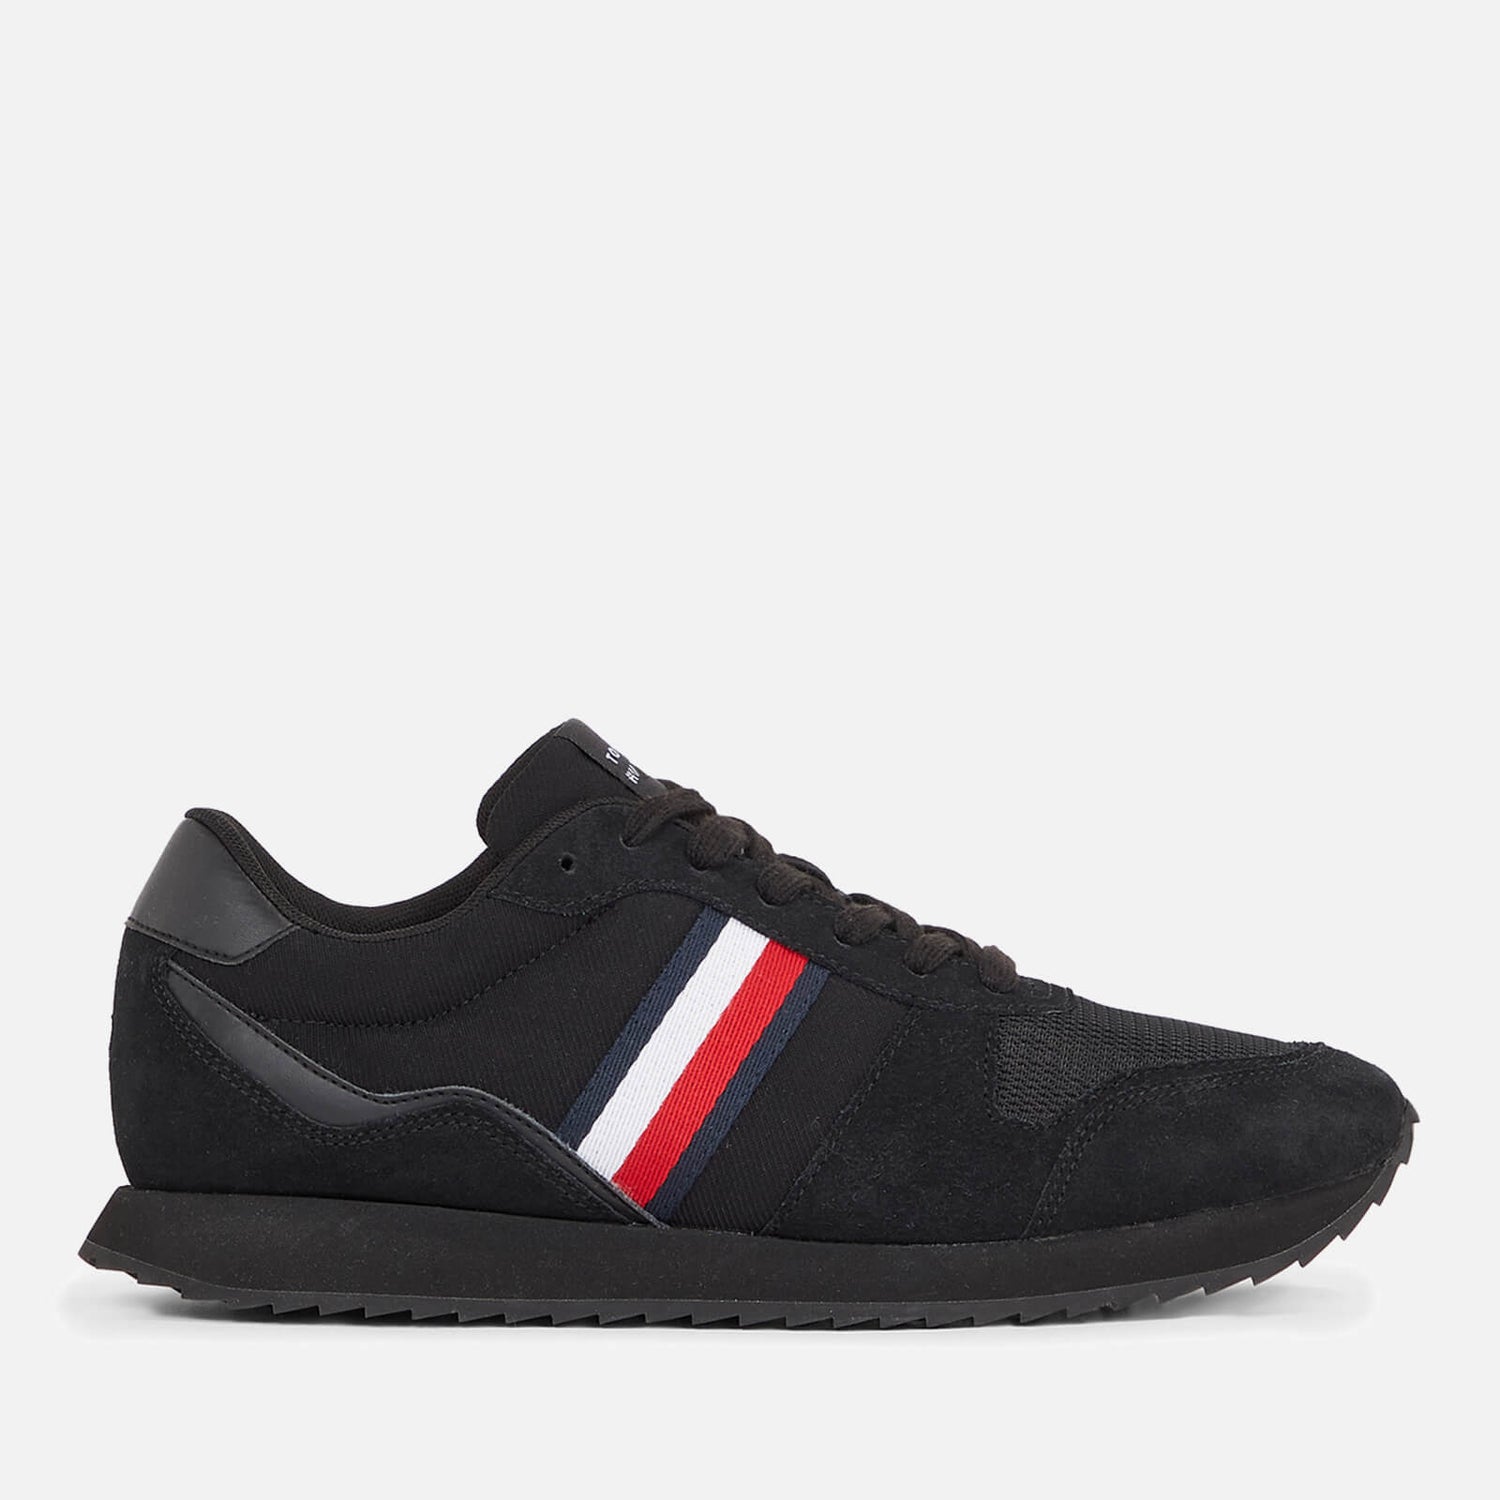 Tommy Hilfiger Men's Evo Mix Suede, Leather and Mesh Trainers | TheHut.com